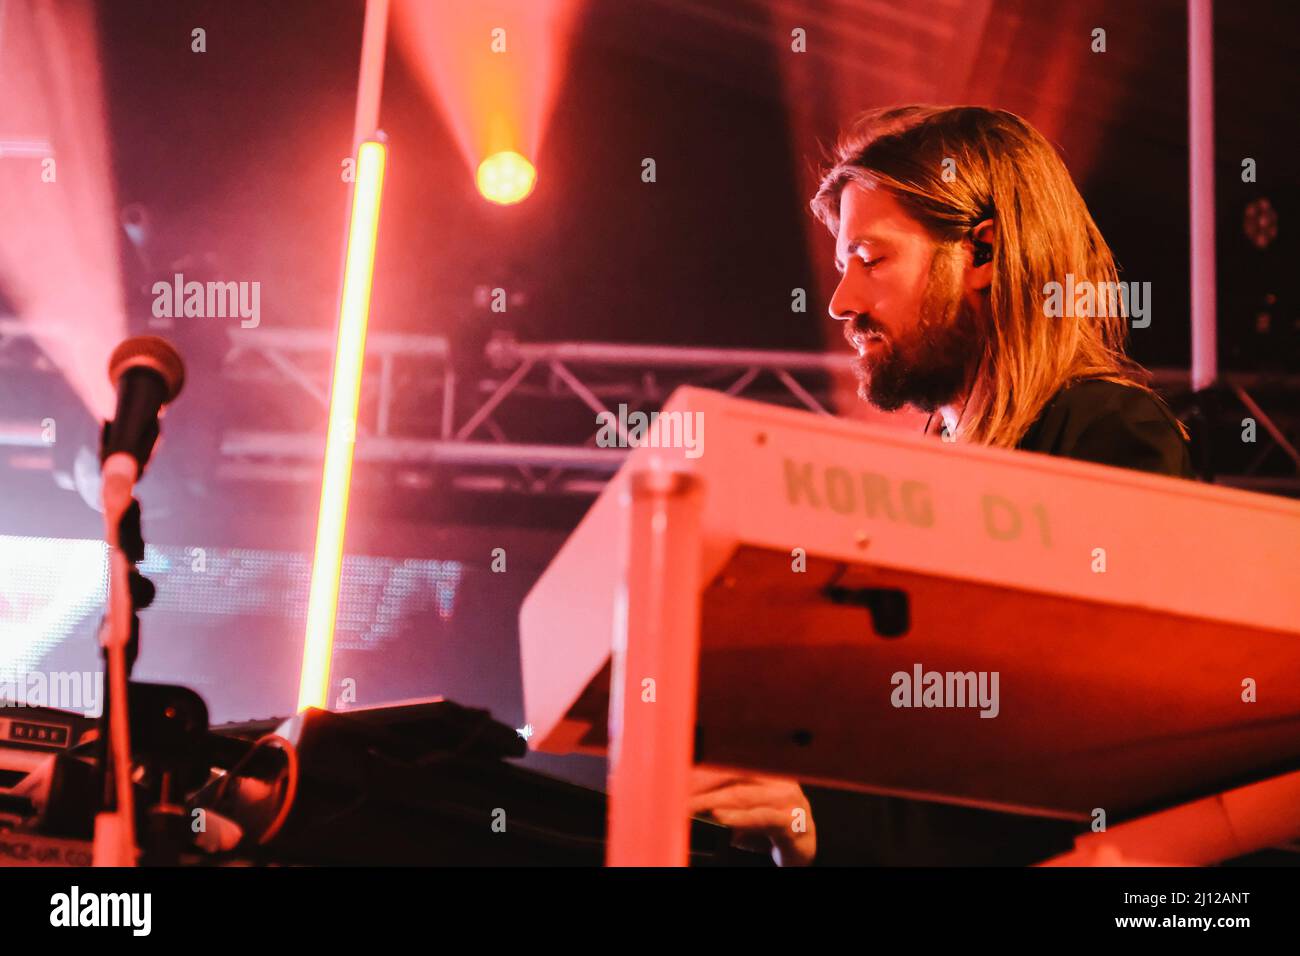 Southampton, UK. 21st Mar, 2022. Paul Frick, Berlin born musician composer and keyboard player, formerly of Brandt Brauer Frick, on stage with German electronic band Tangerine Dream founded in 1967, performing live at the Engine Rooms, Southampton. (Photo by Dawn Fletcher-Park/SOPA Images/Sipa USA) Credit: Sipa USA/Alamy Live News Stock Photo